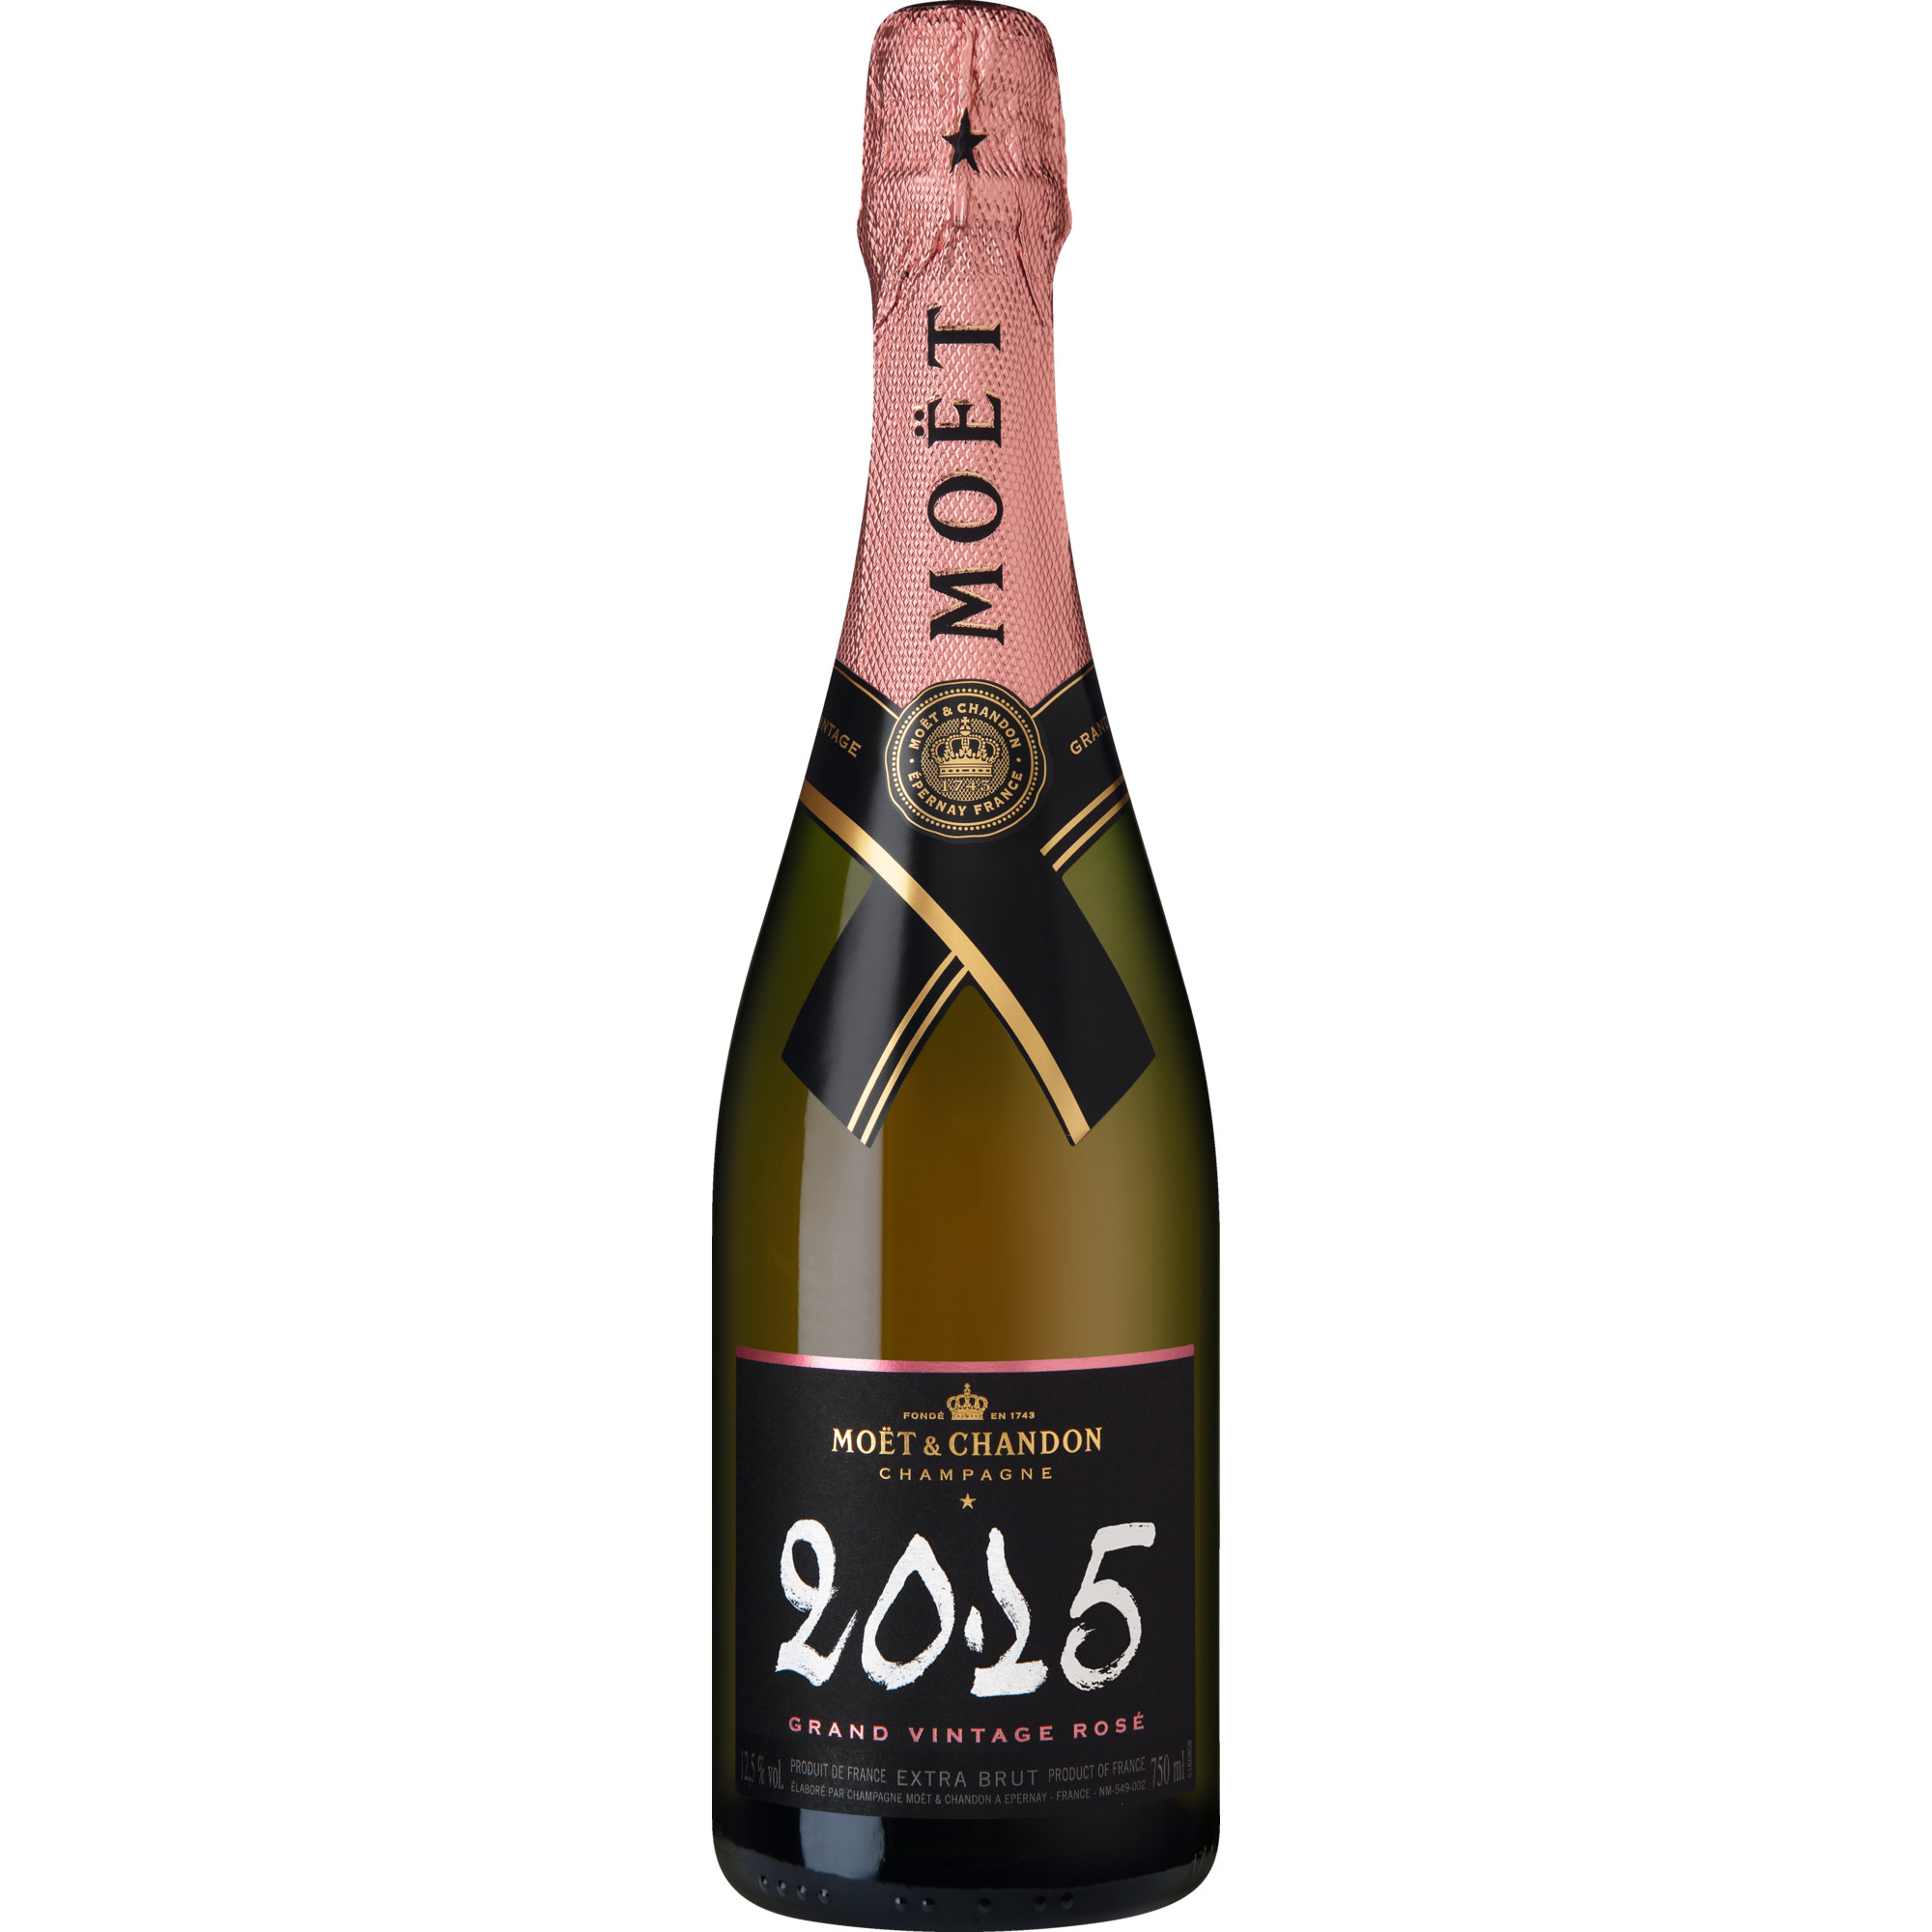 Image of Champagne Moet & Chandon Grand Vintage Rosé, Brut, Champagne AC, Champagne, 2015, Schaumwein